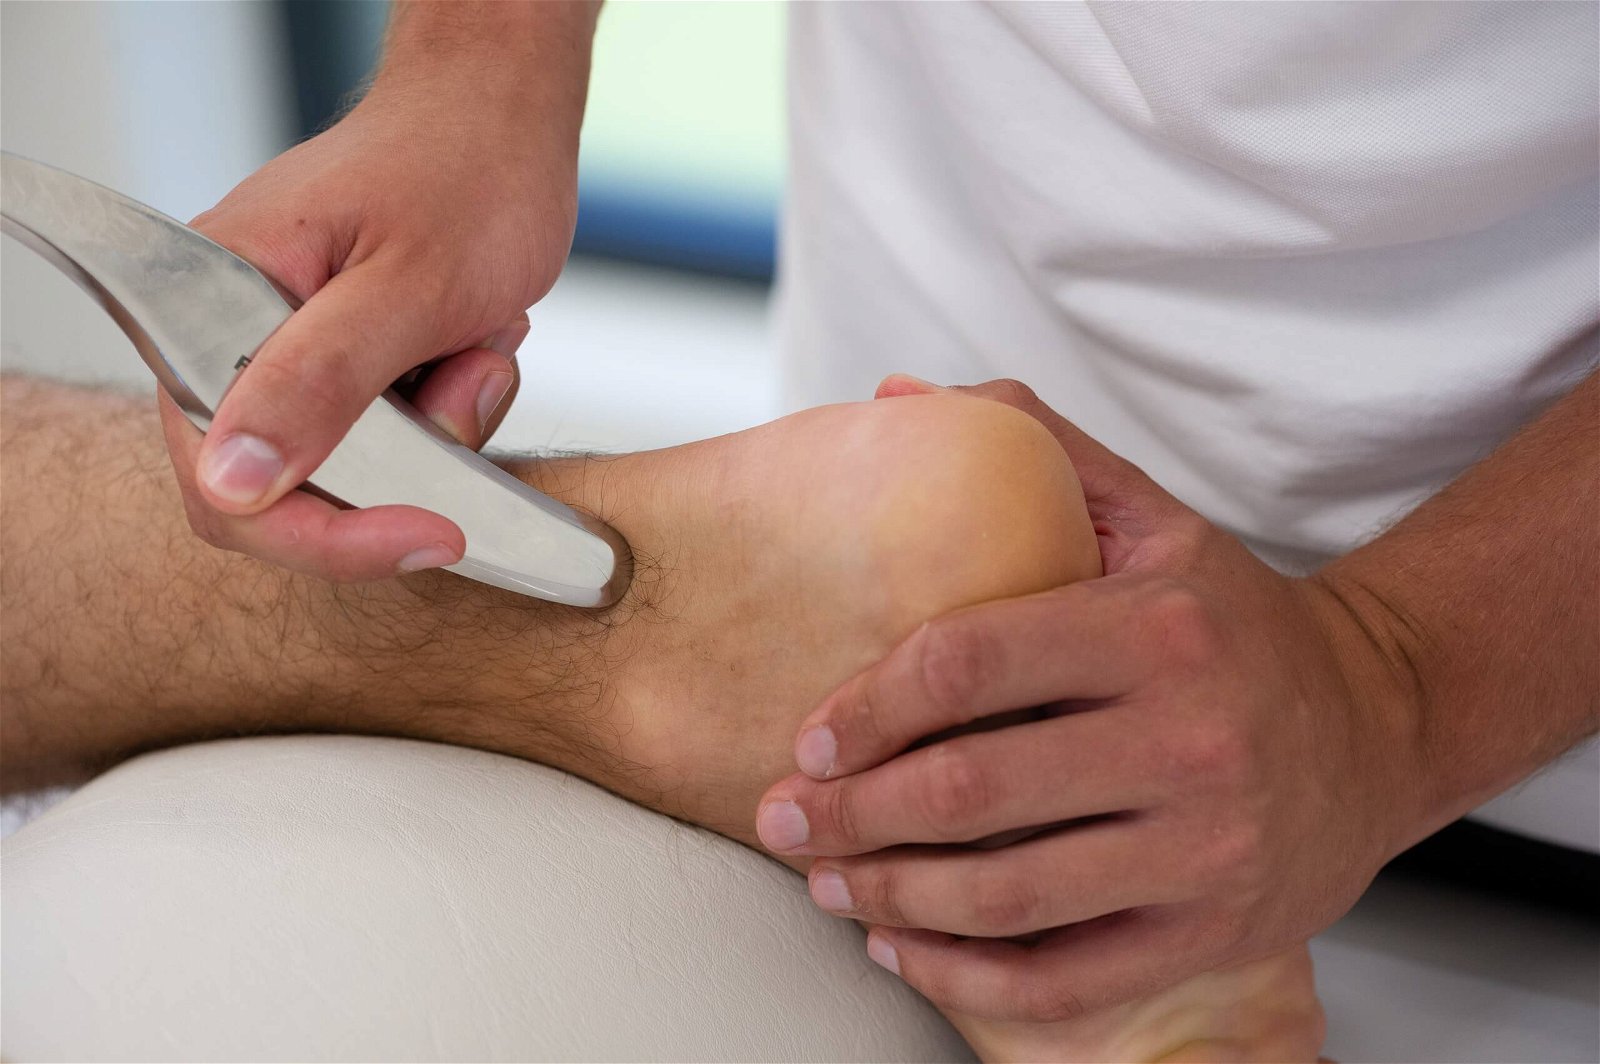 rehabilitation of Achilles tendon by a physiotherapist using specialized tools